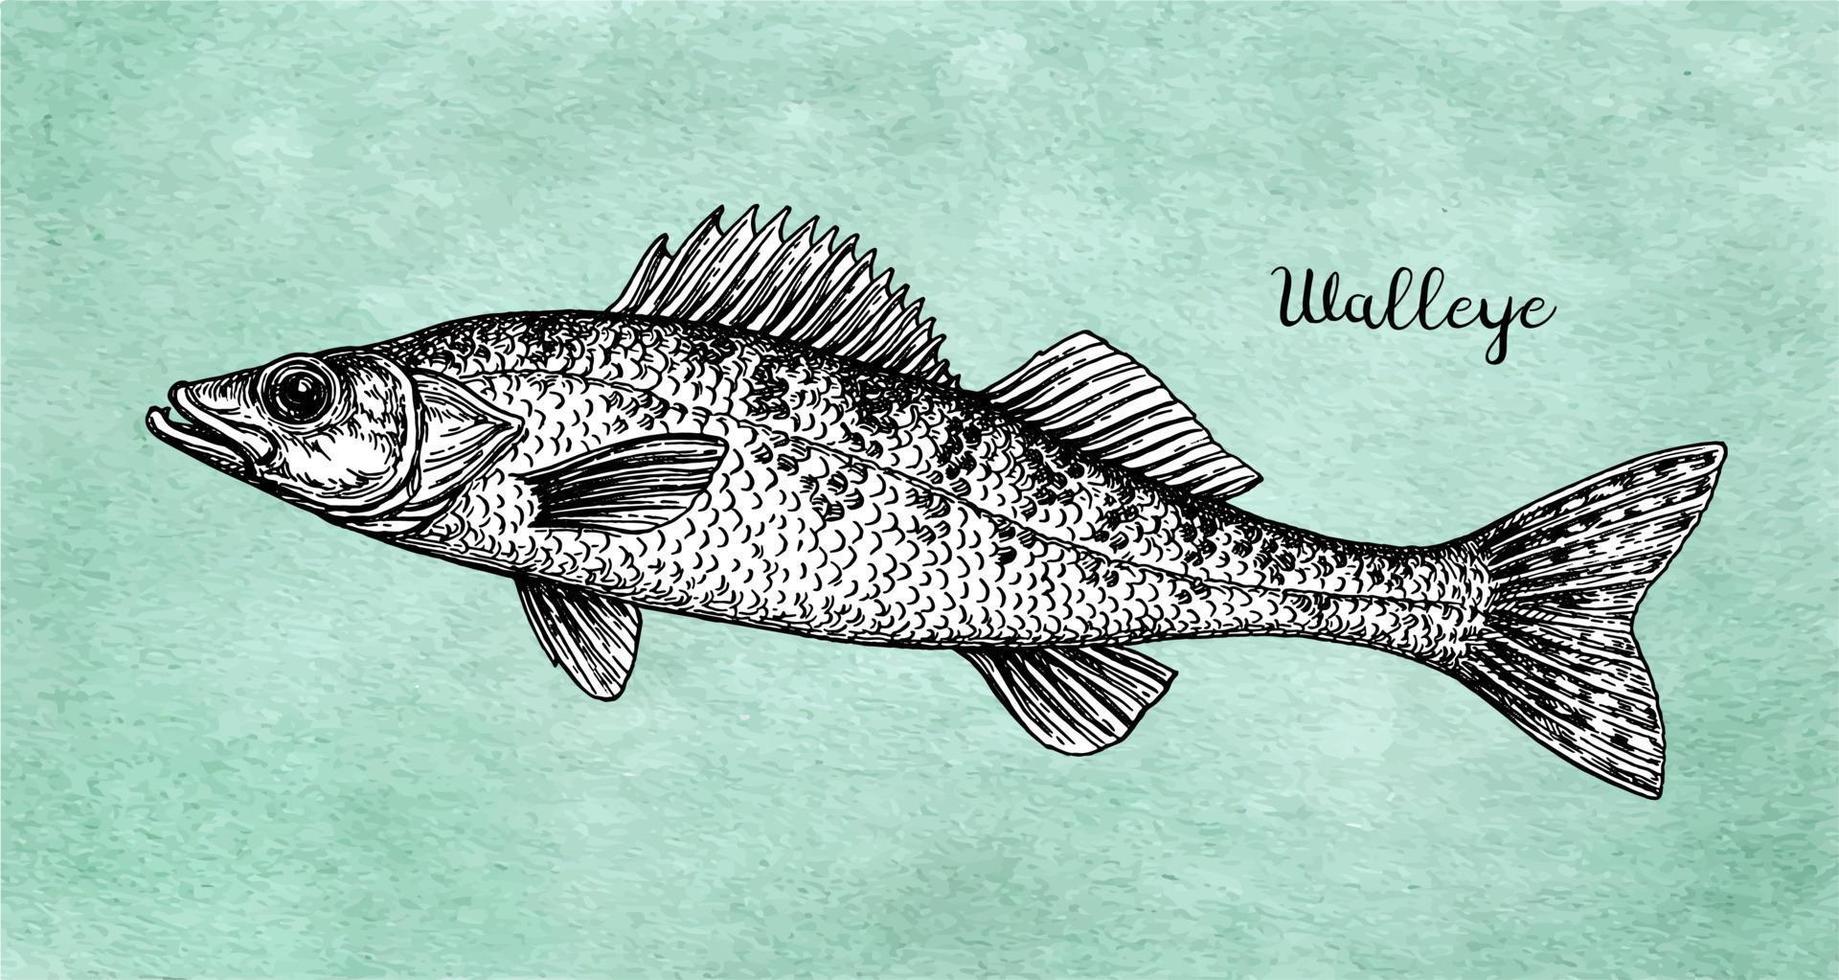 Walleye or yellow pike. Freshwater fish. Ink sketch on old paper